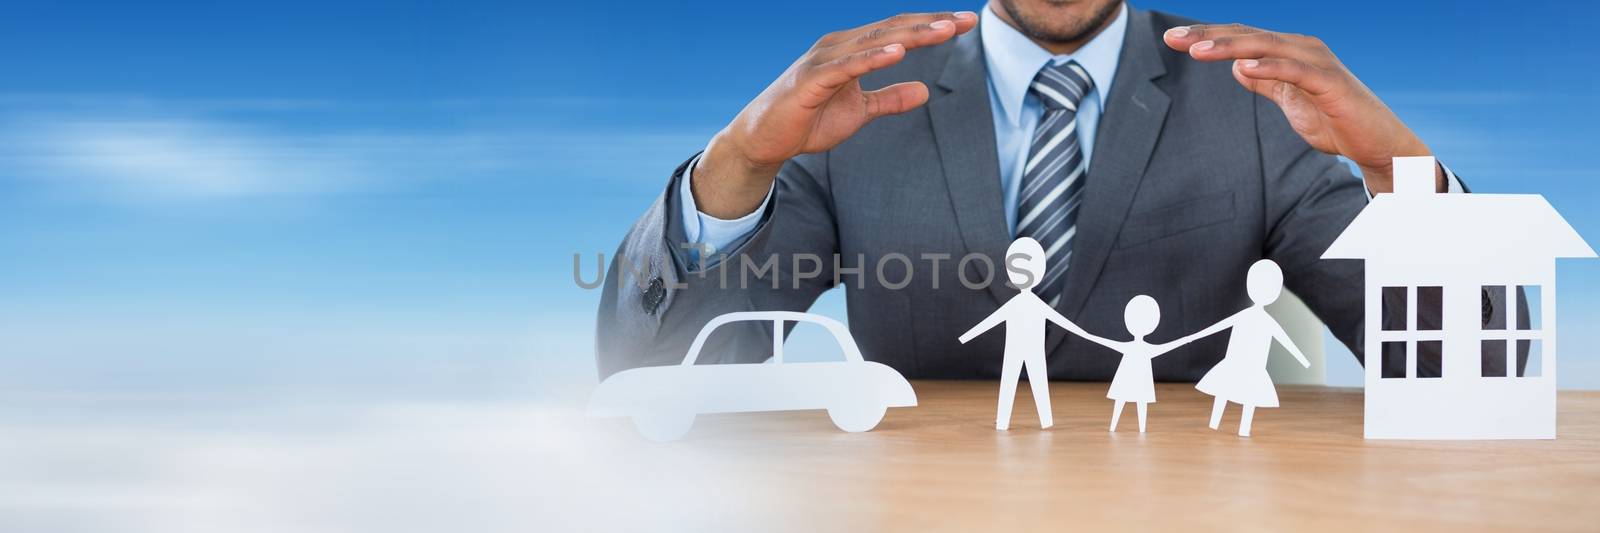 Digital composite of Paper Cut Out family home and car with businessman's hands